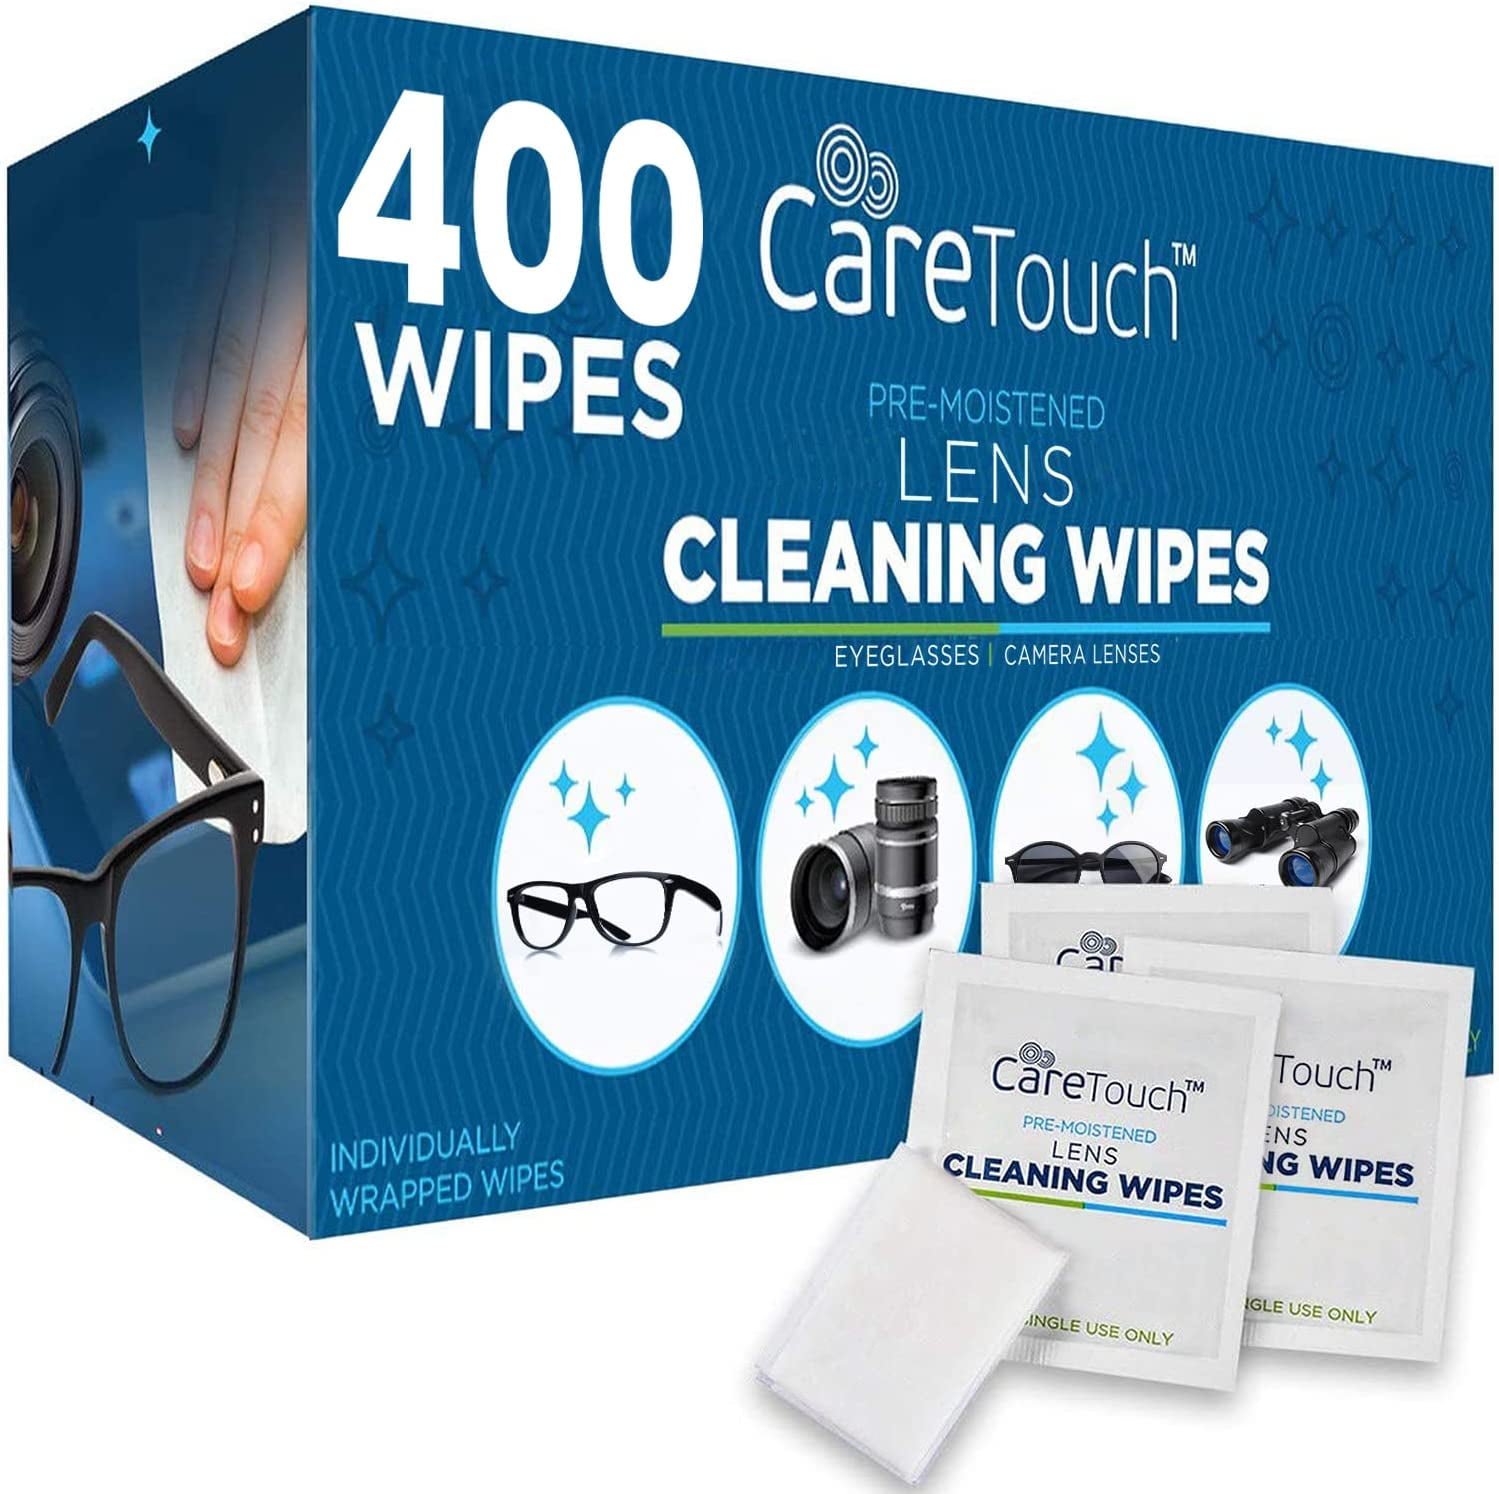 Glasses Wipes Lens Cleaner - Lens Wipes for Eyeglasses - 400 Pre-moistened  Individually Wrapped Wipes for Eye Glasses, Electronics, Phone, Computer